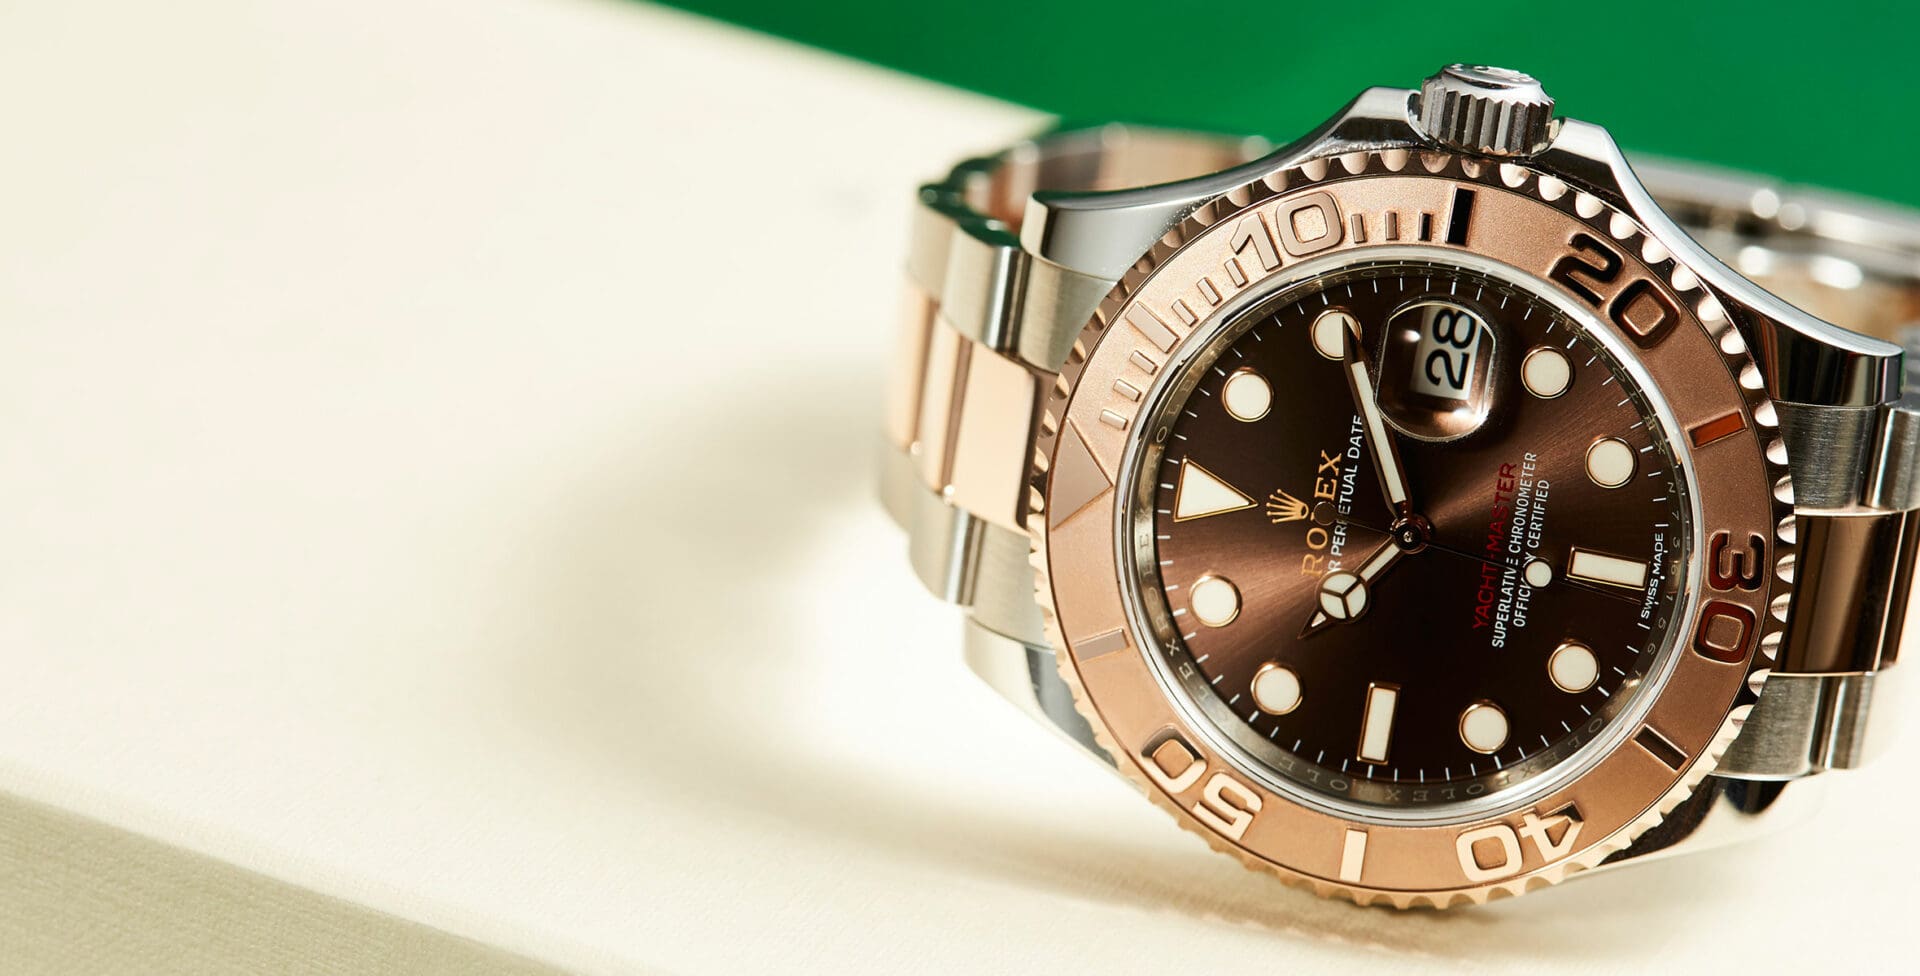 HANDS-ON: The ultimate his and hers watch – the Rolex Yacht-Master 40 Everose Rolesor